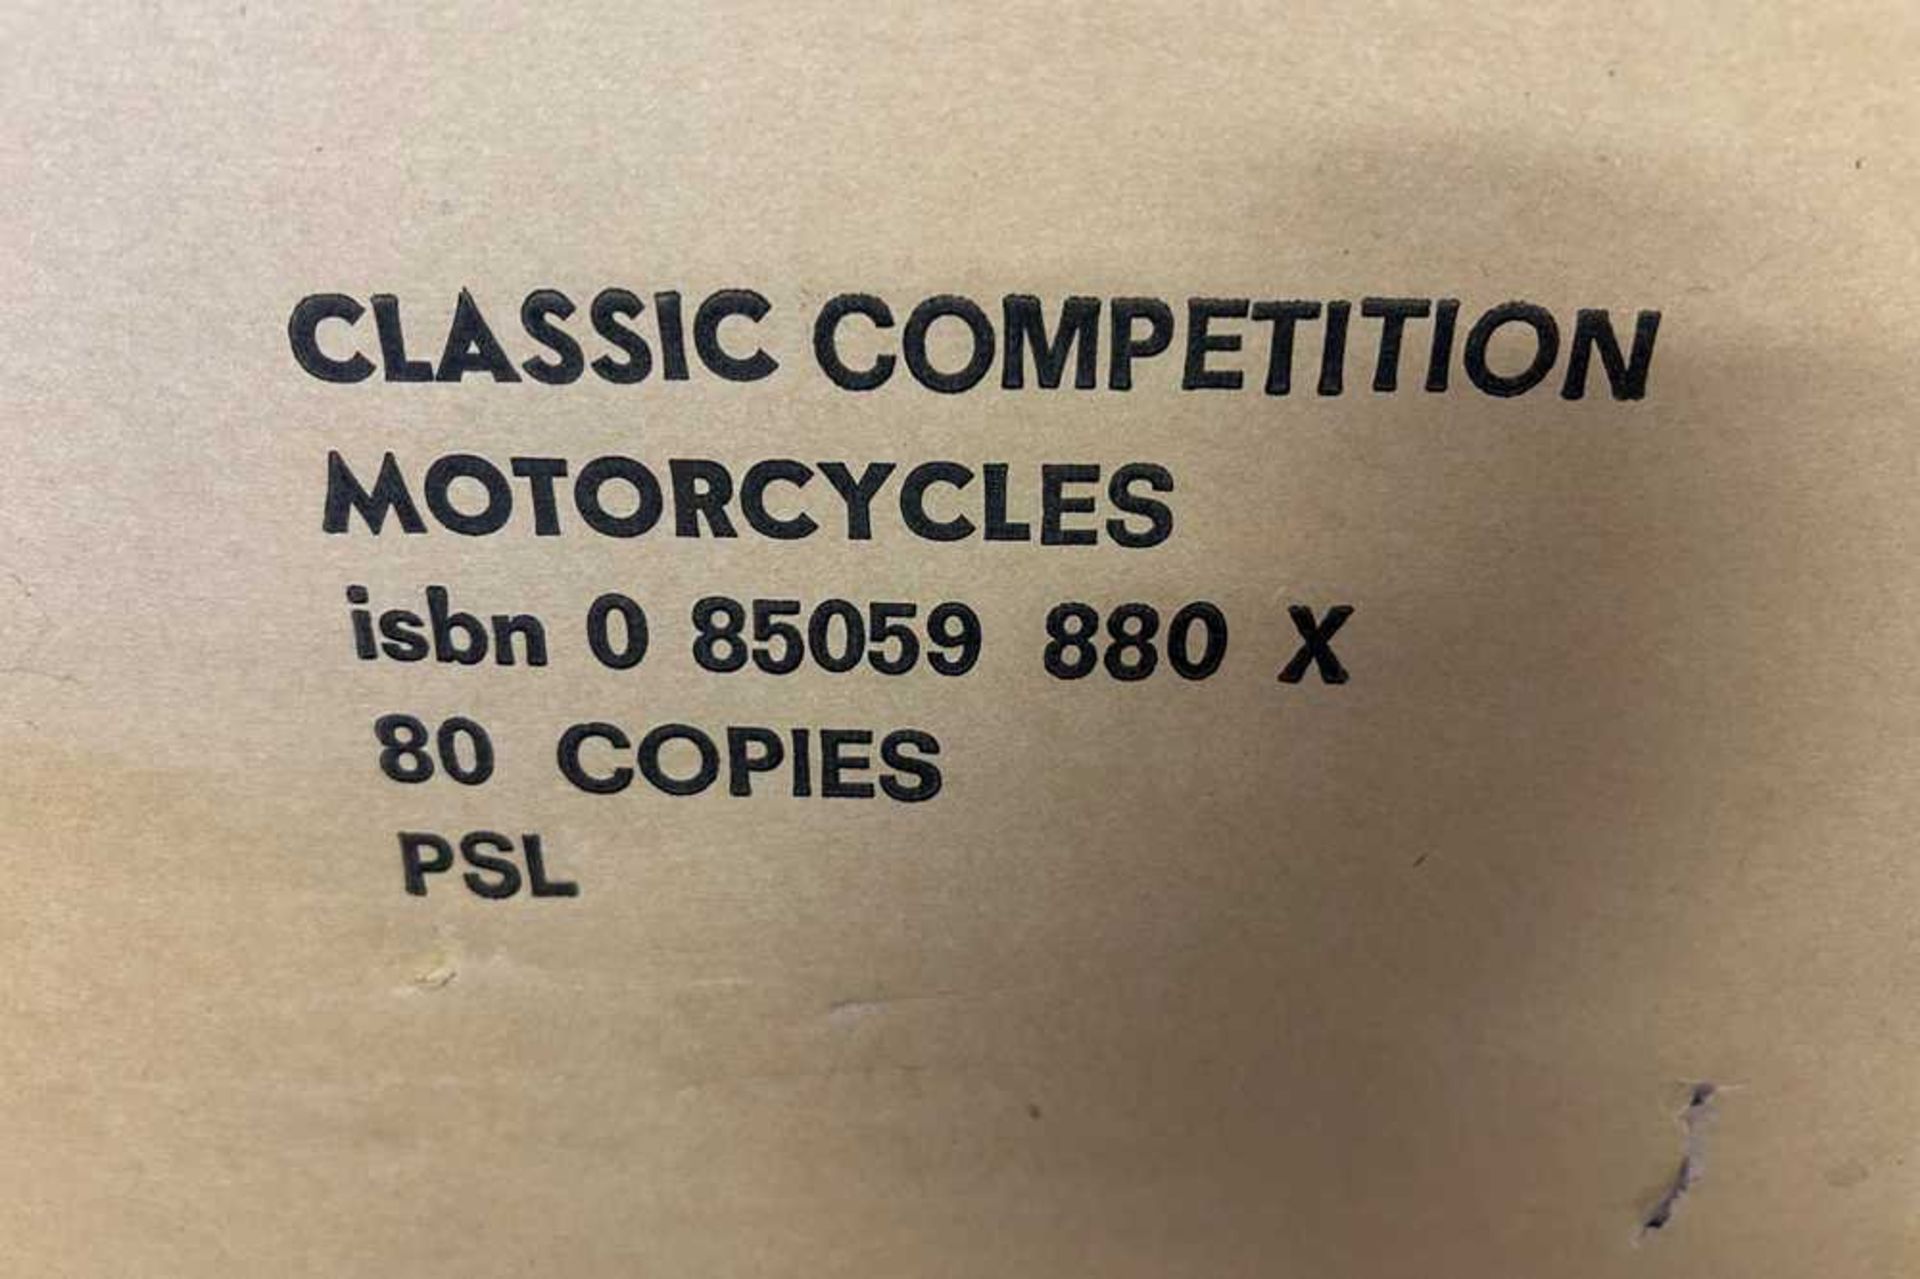 50 Boxes of the Book - 'Classic Competition Motorcycles' by Bob Currie - Image 3 of 3